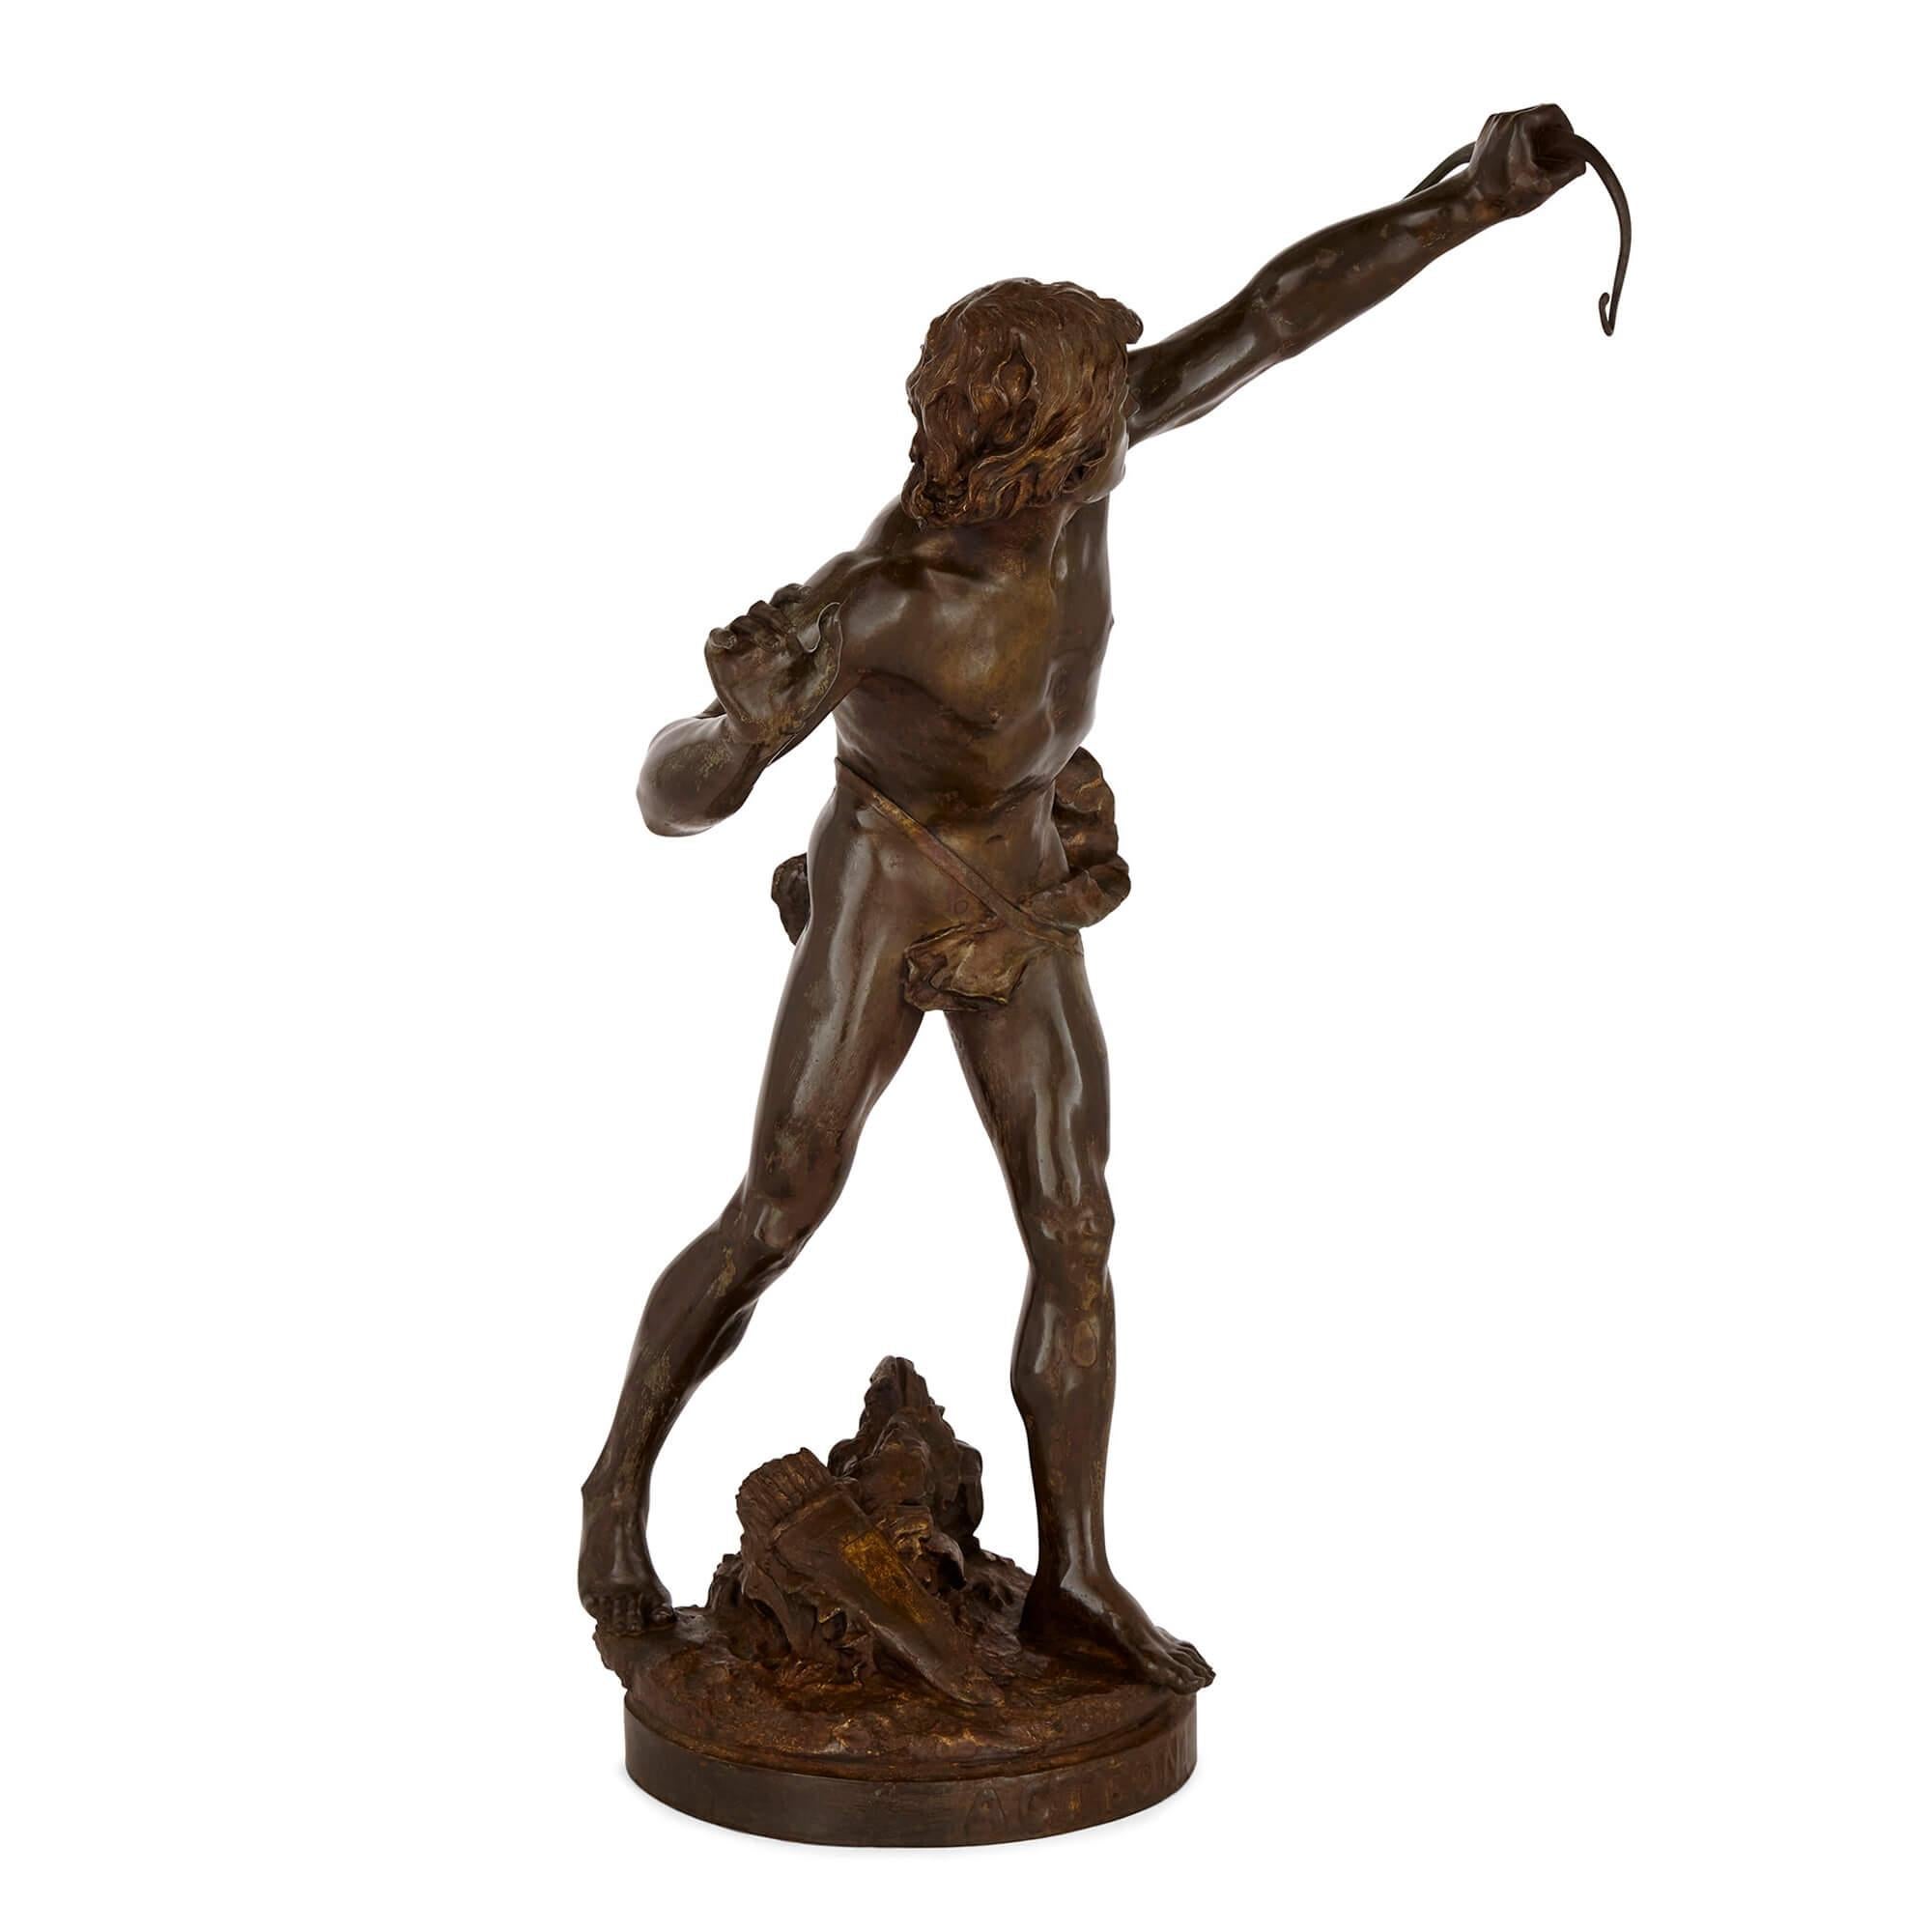 Large patinated bronze figure of Actaeon by Emile Laporte
French, late 19th century
Measures: height 84cm, width 42cm, depth 44cm

By the French artist Emile Laporte, and cast by the Siot-Decauville Foundry in Paris in the late nineteenth